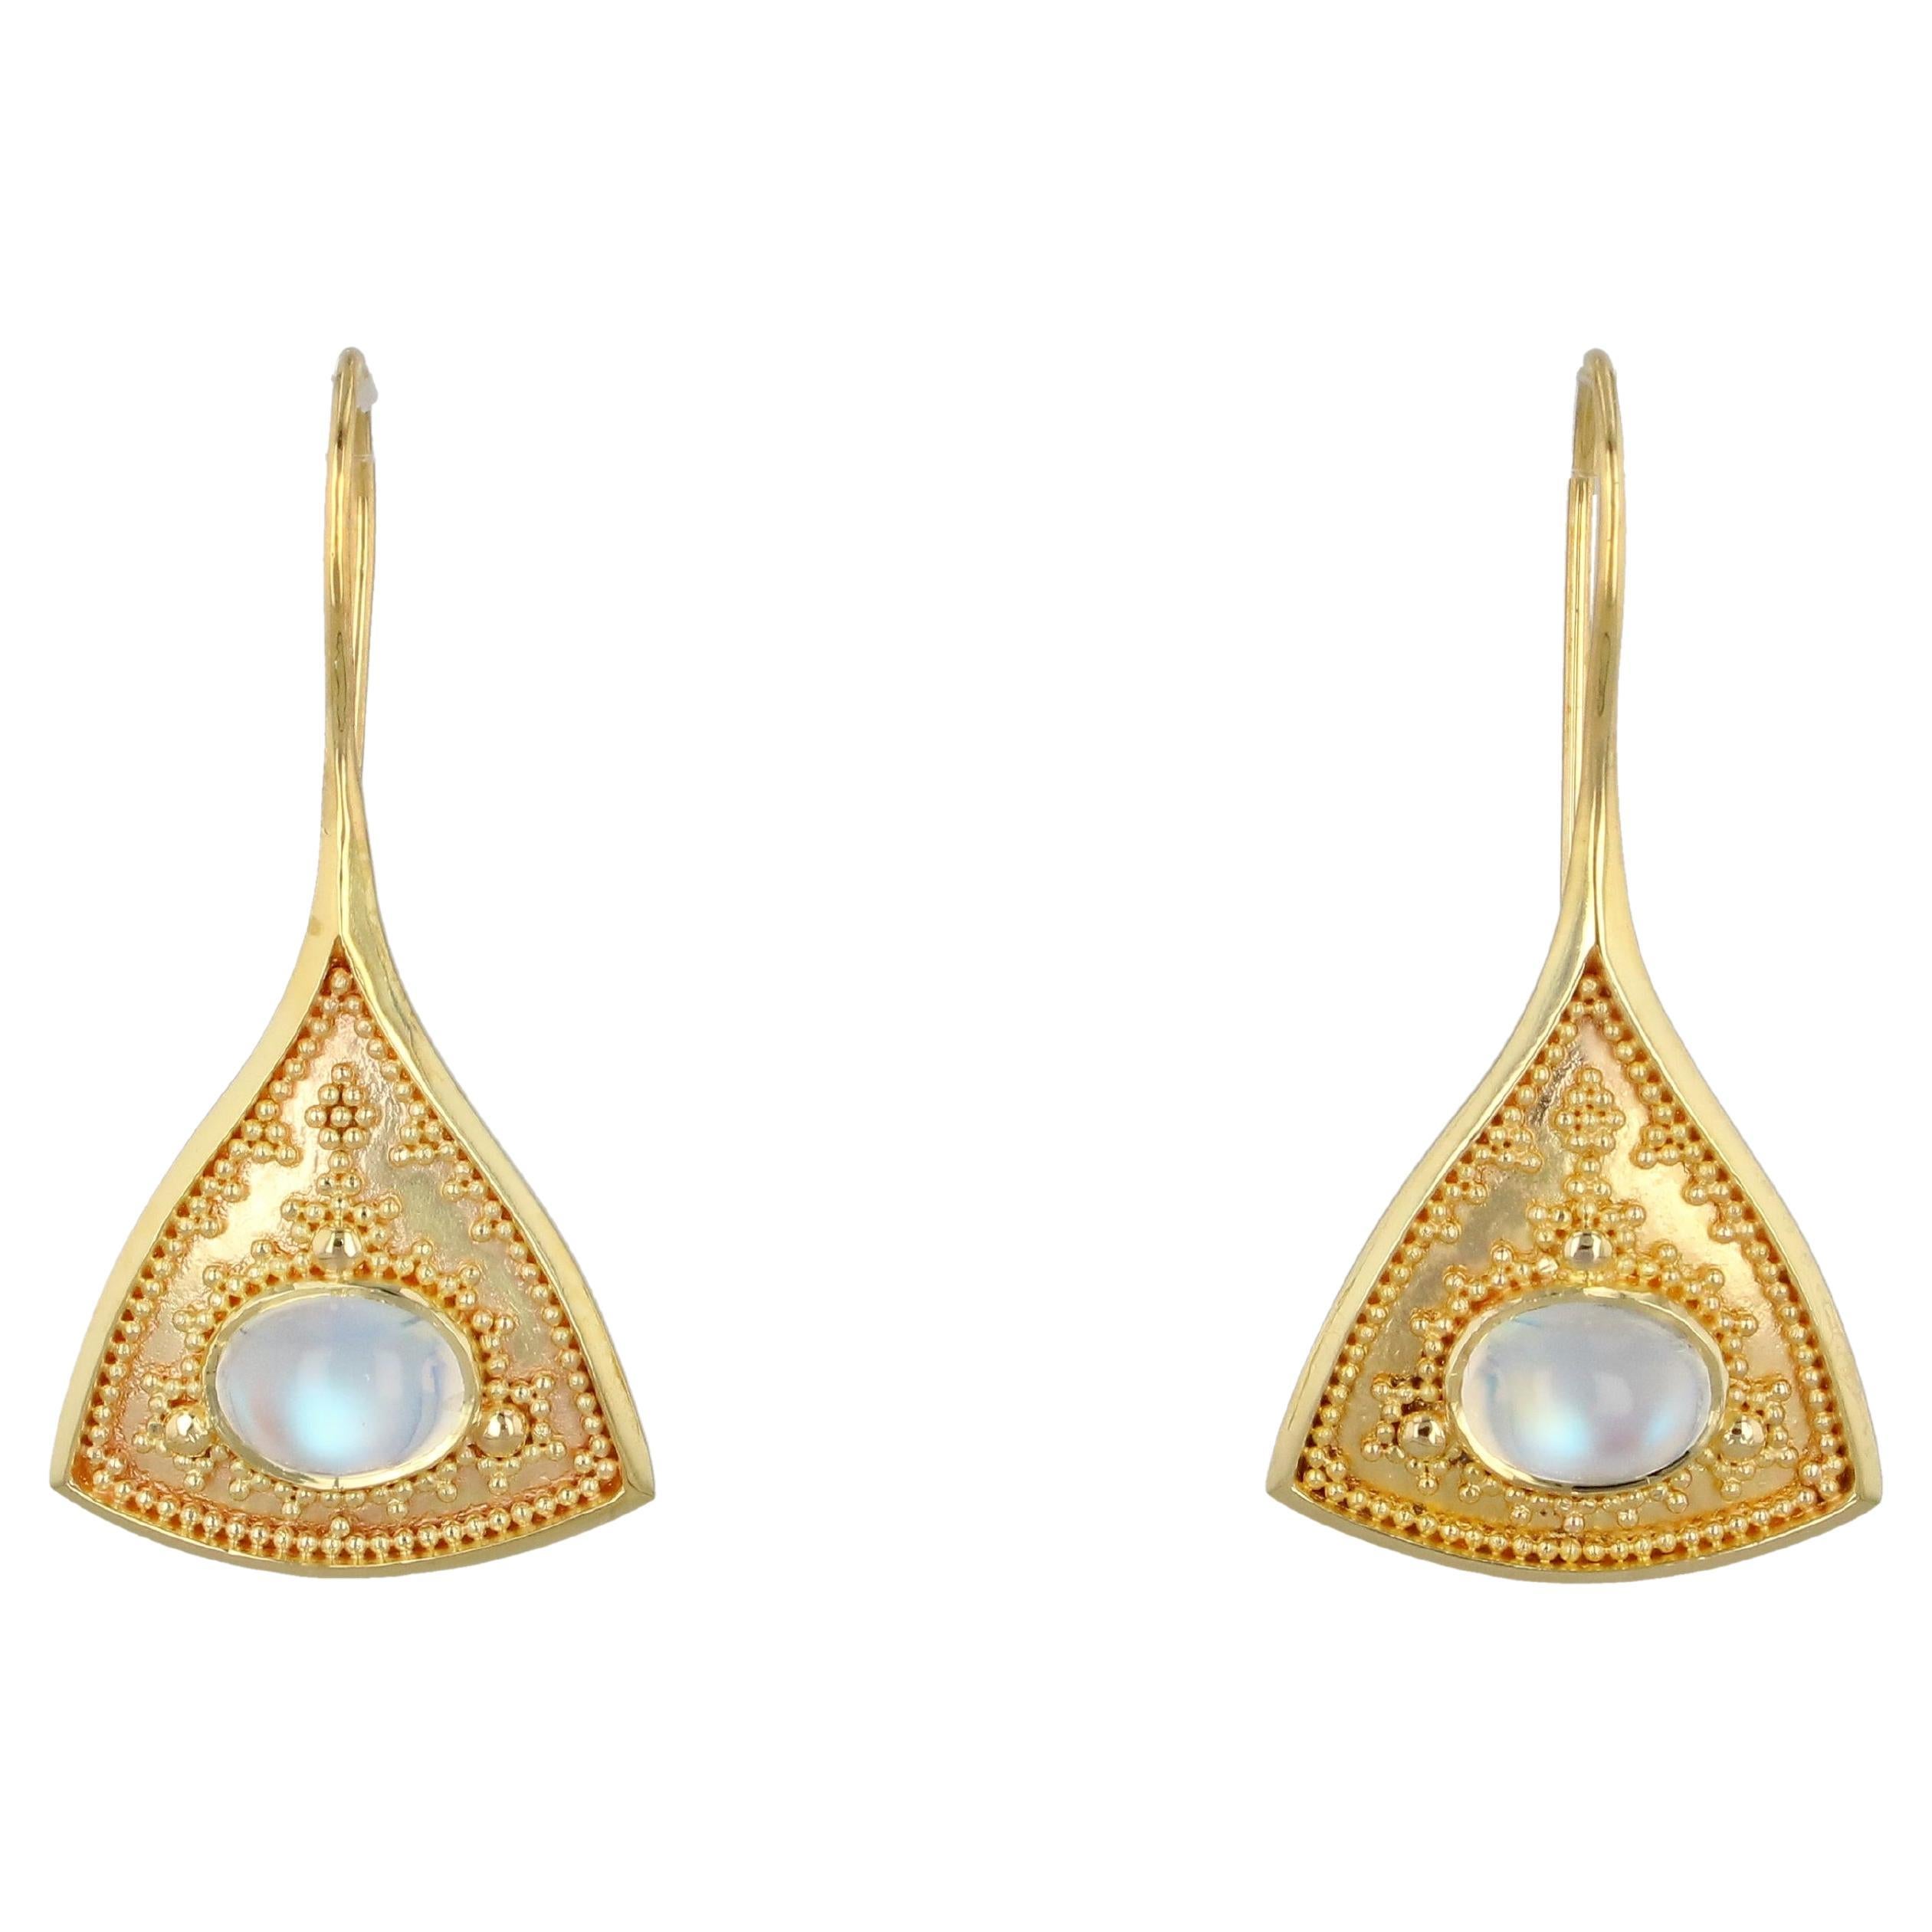 Kent Raible 18 Karat Gold Moonstone Drop Earrings with Gold Granulation For Sale